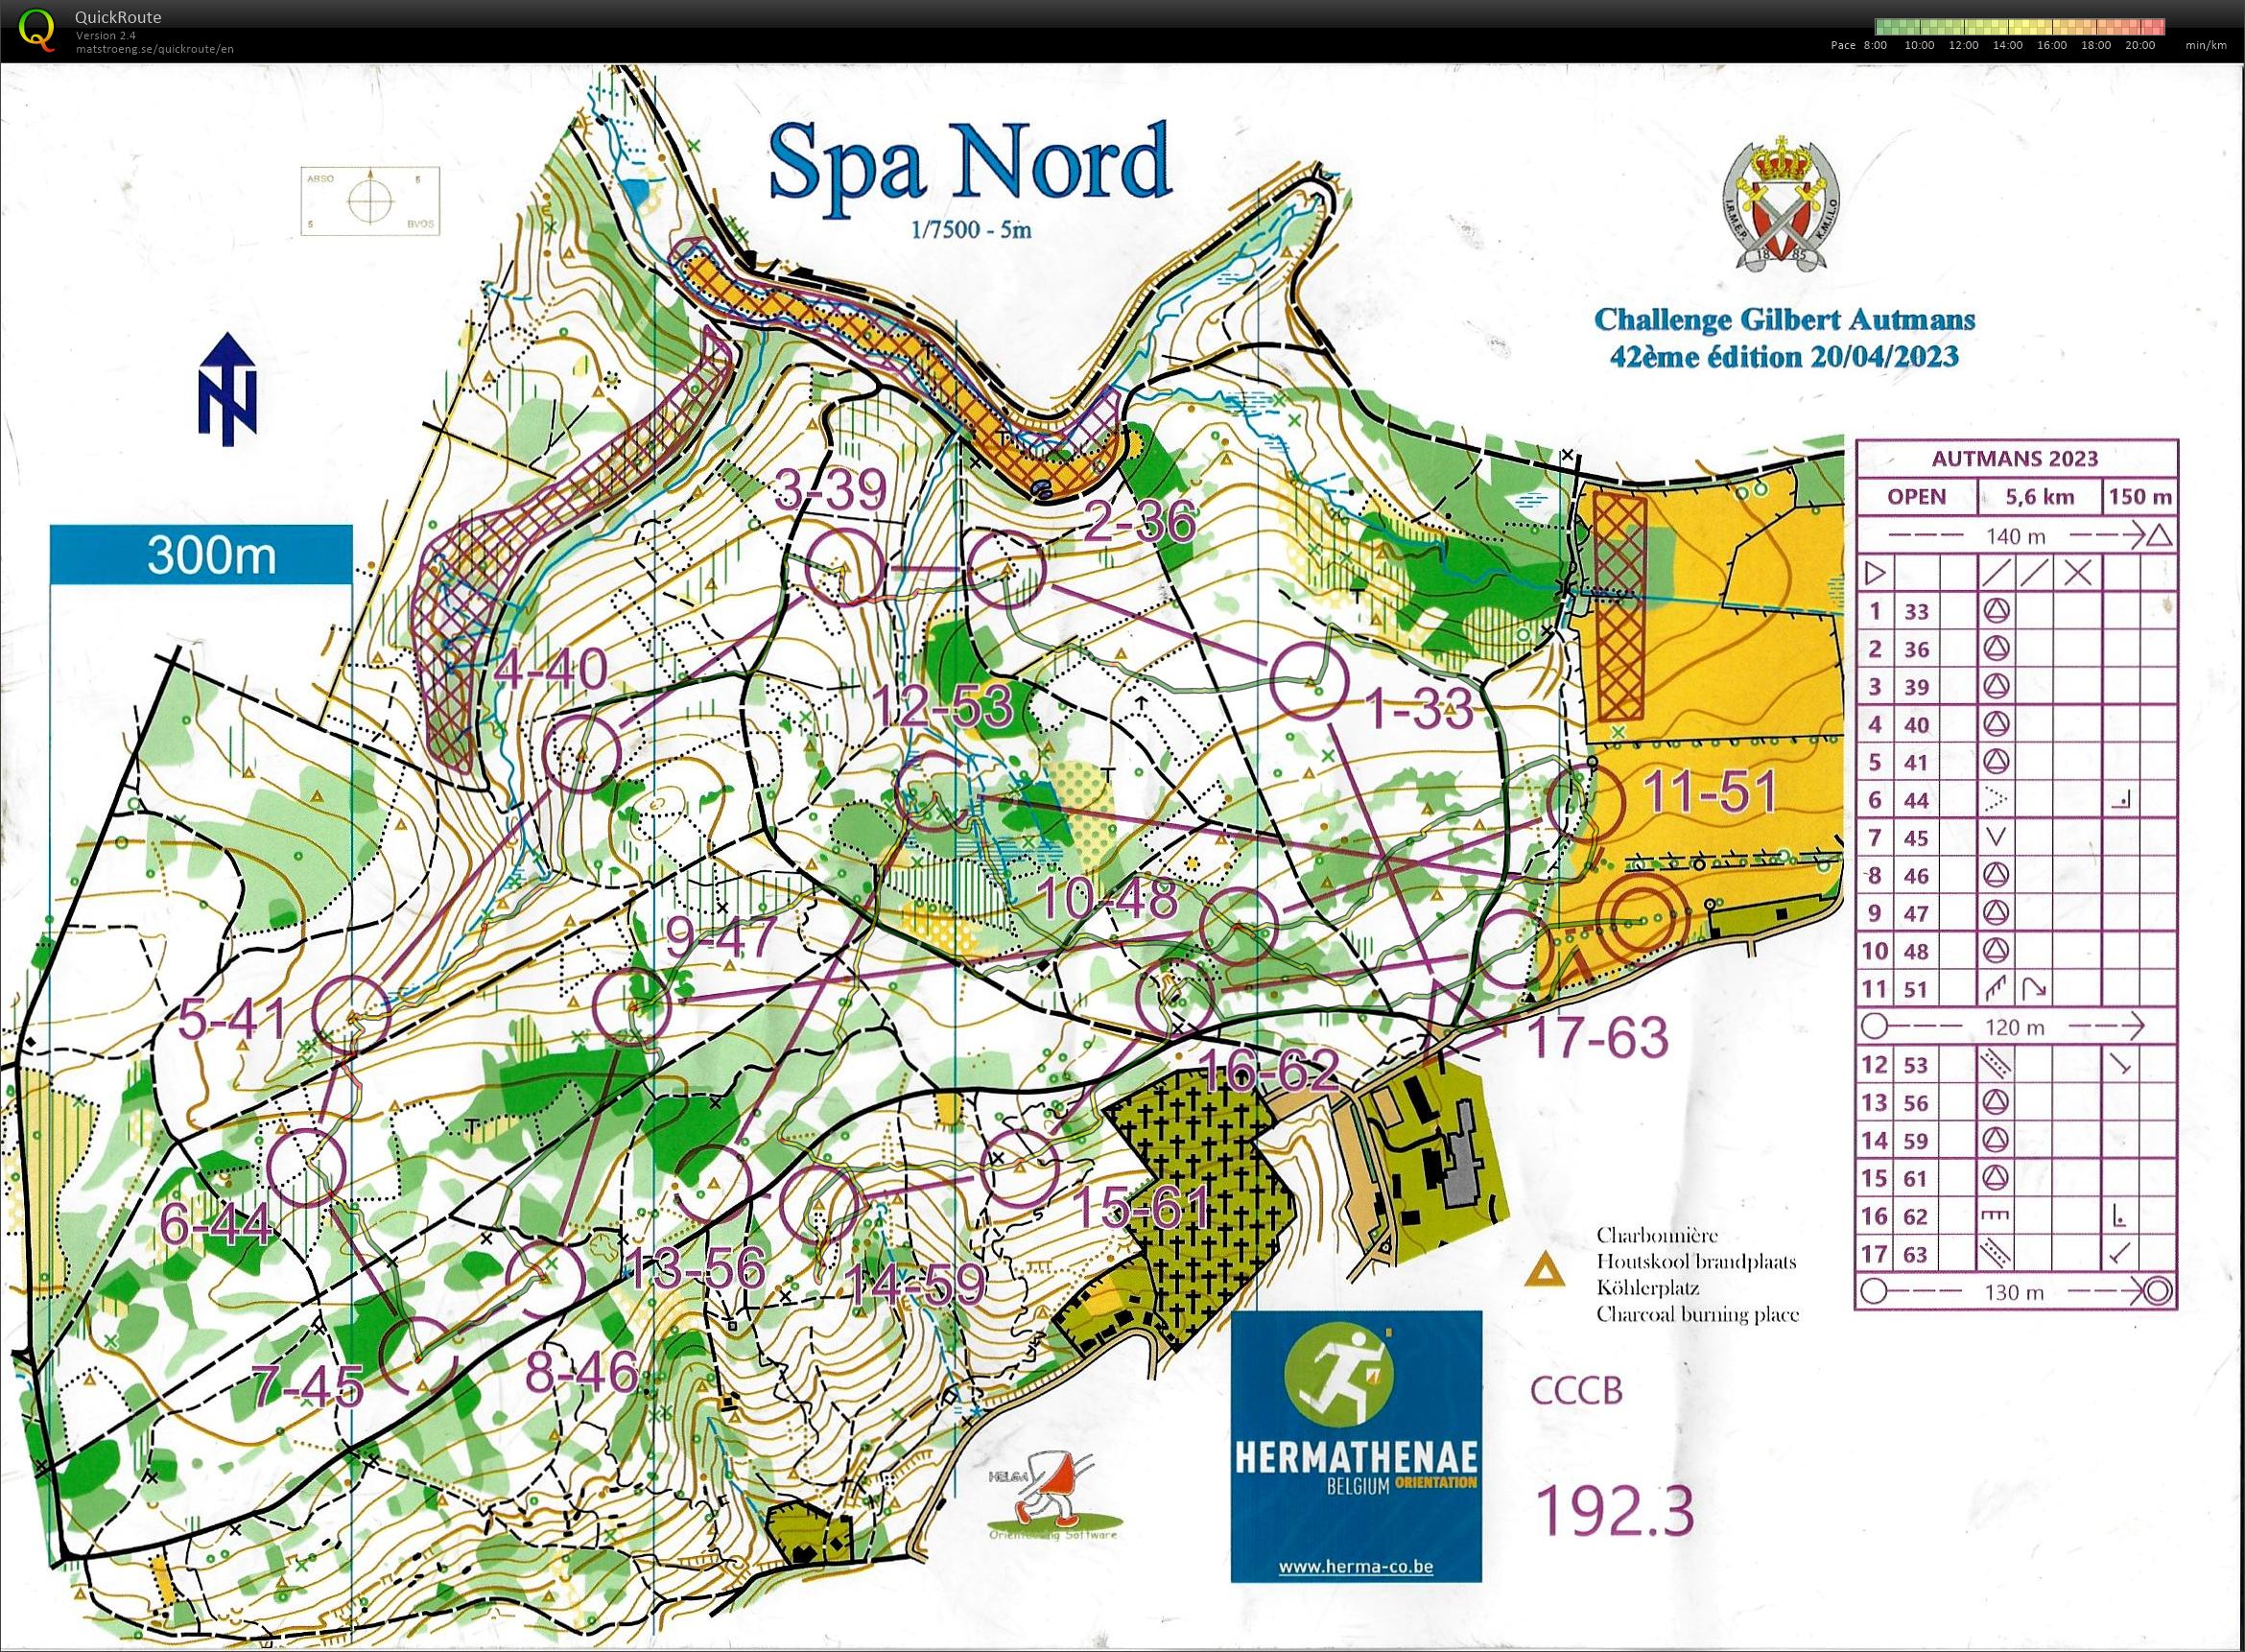 Spa Nord (20/04/2023)